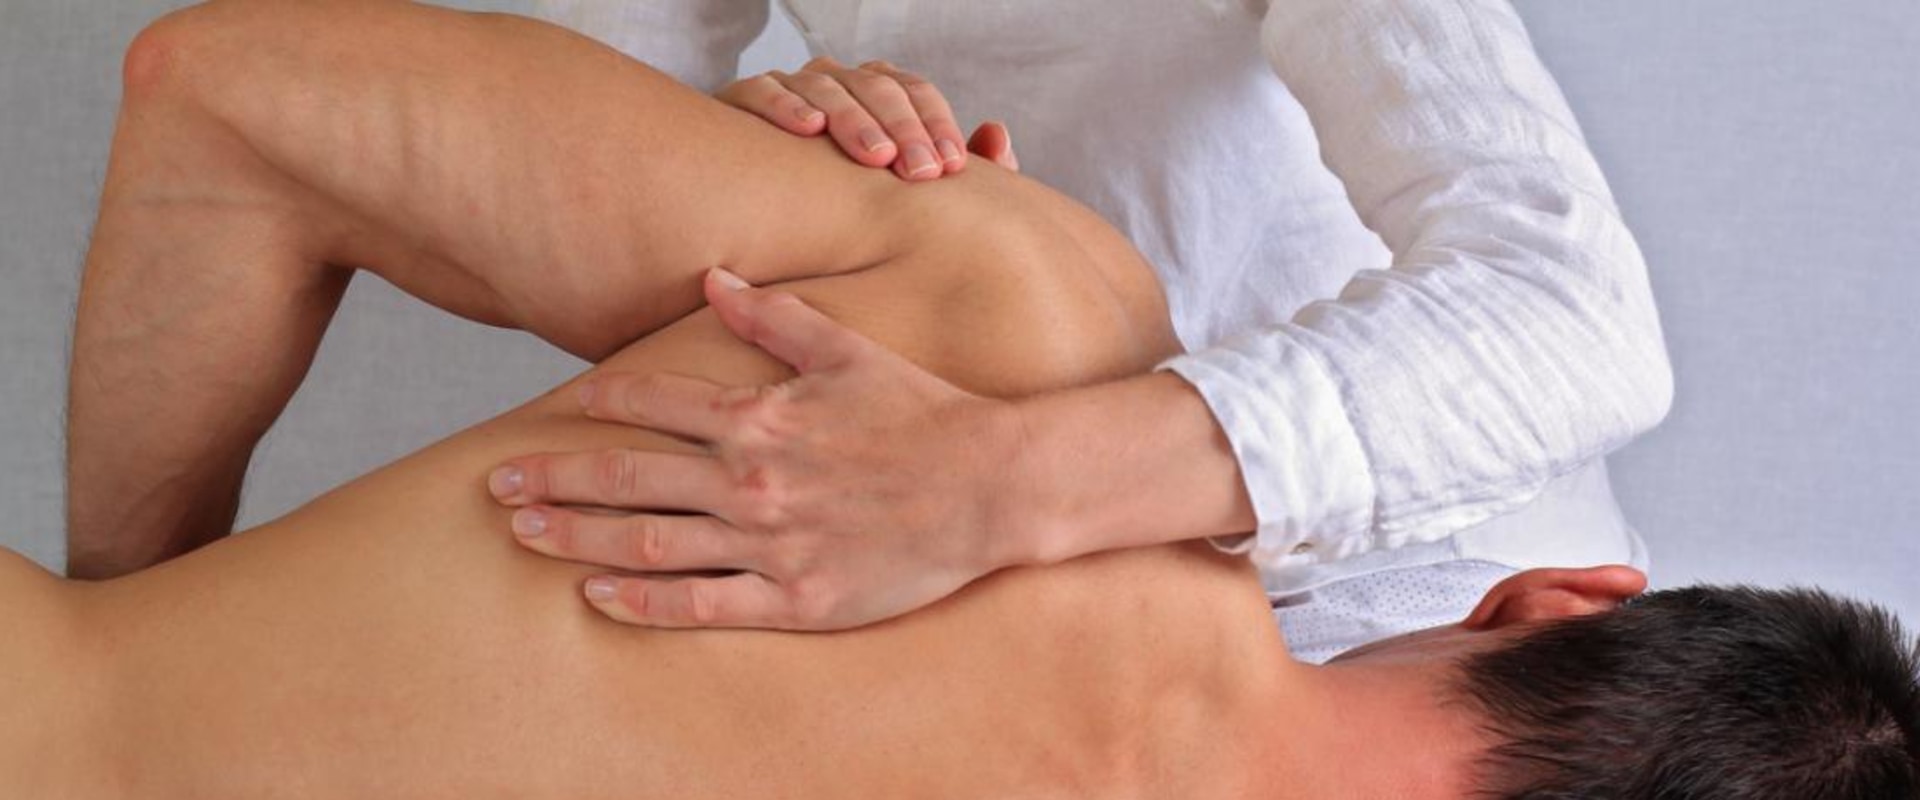 Does an osteopath help with arthritis?